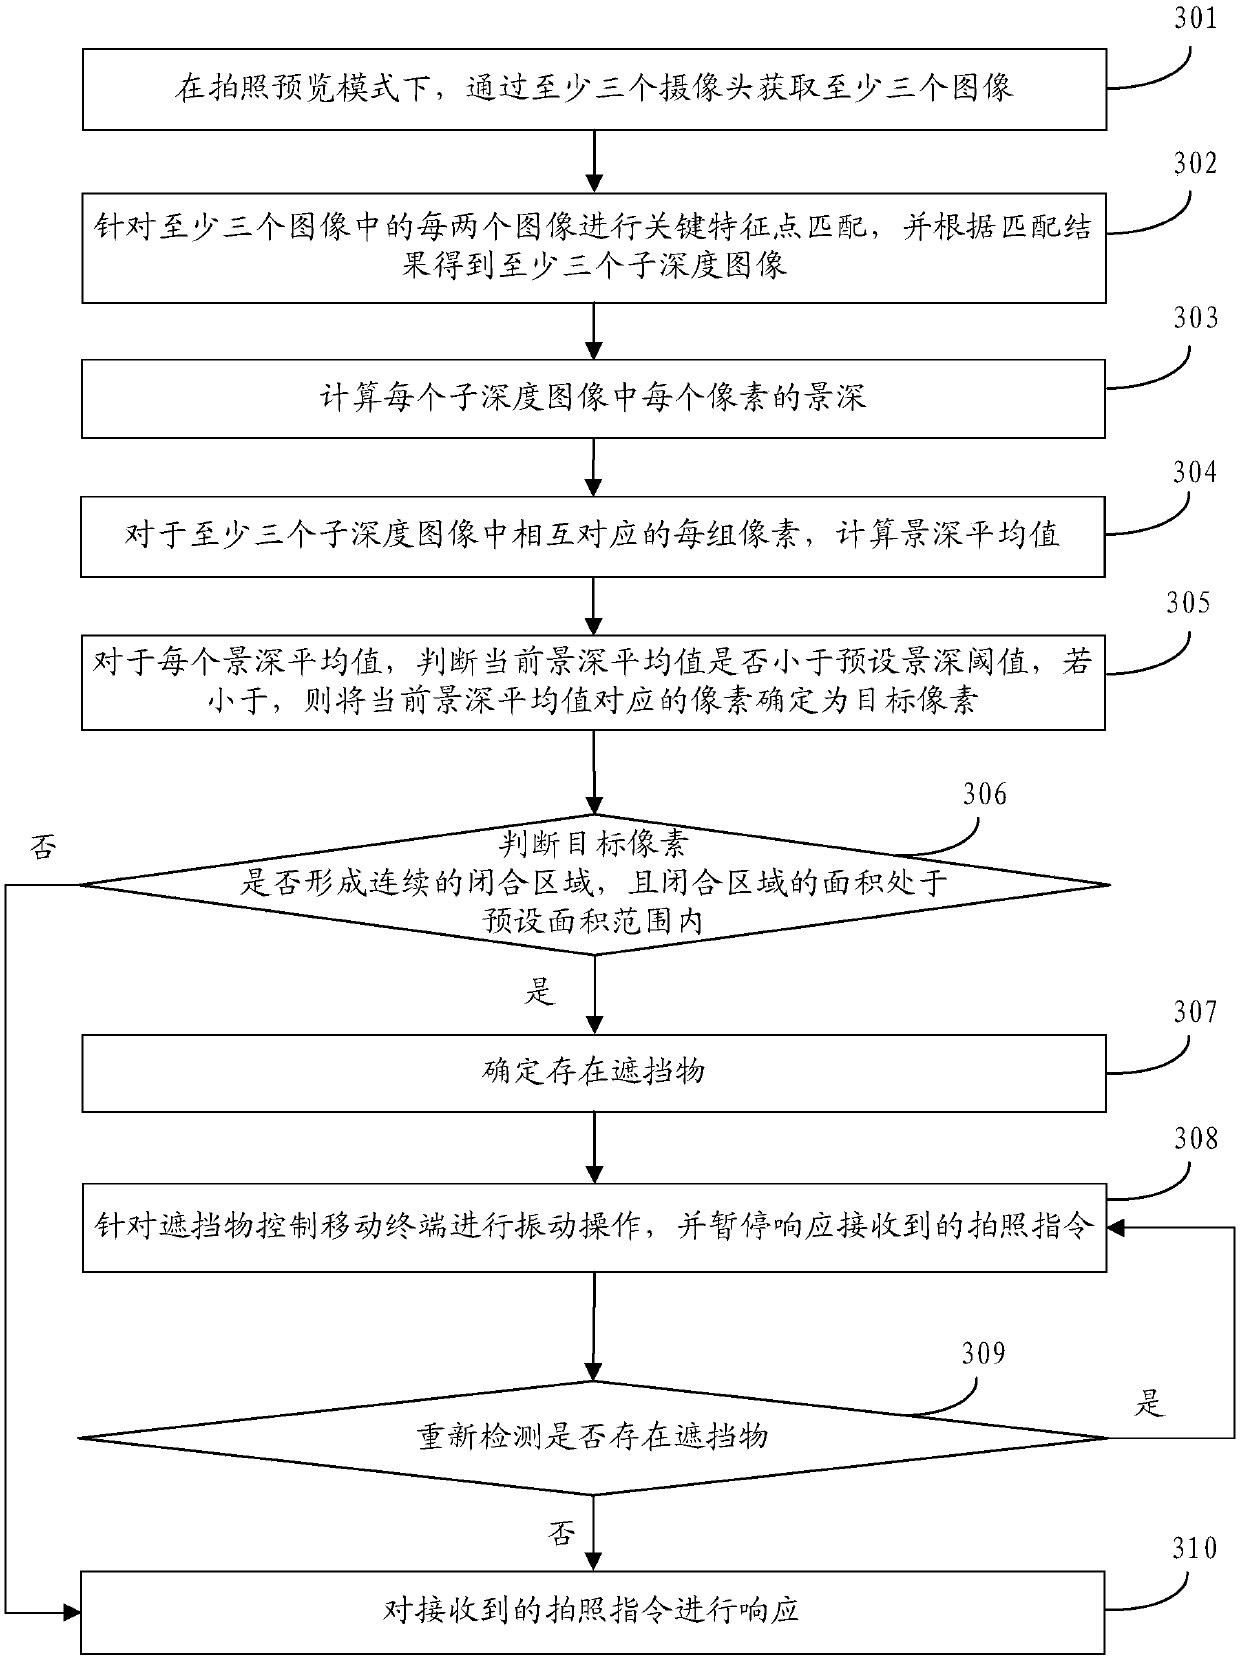 Obstacle detecting method and device, storage medium and mobile terminal